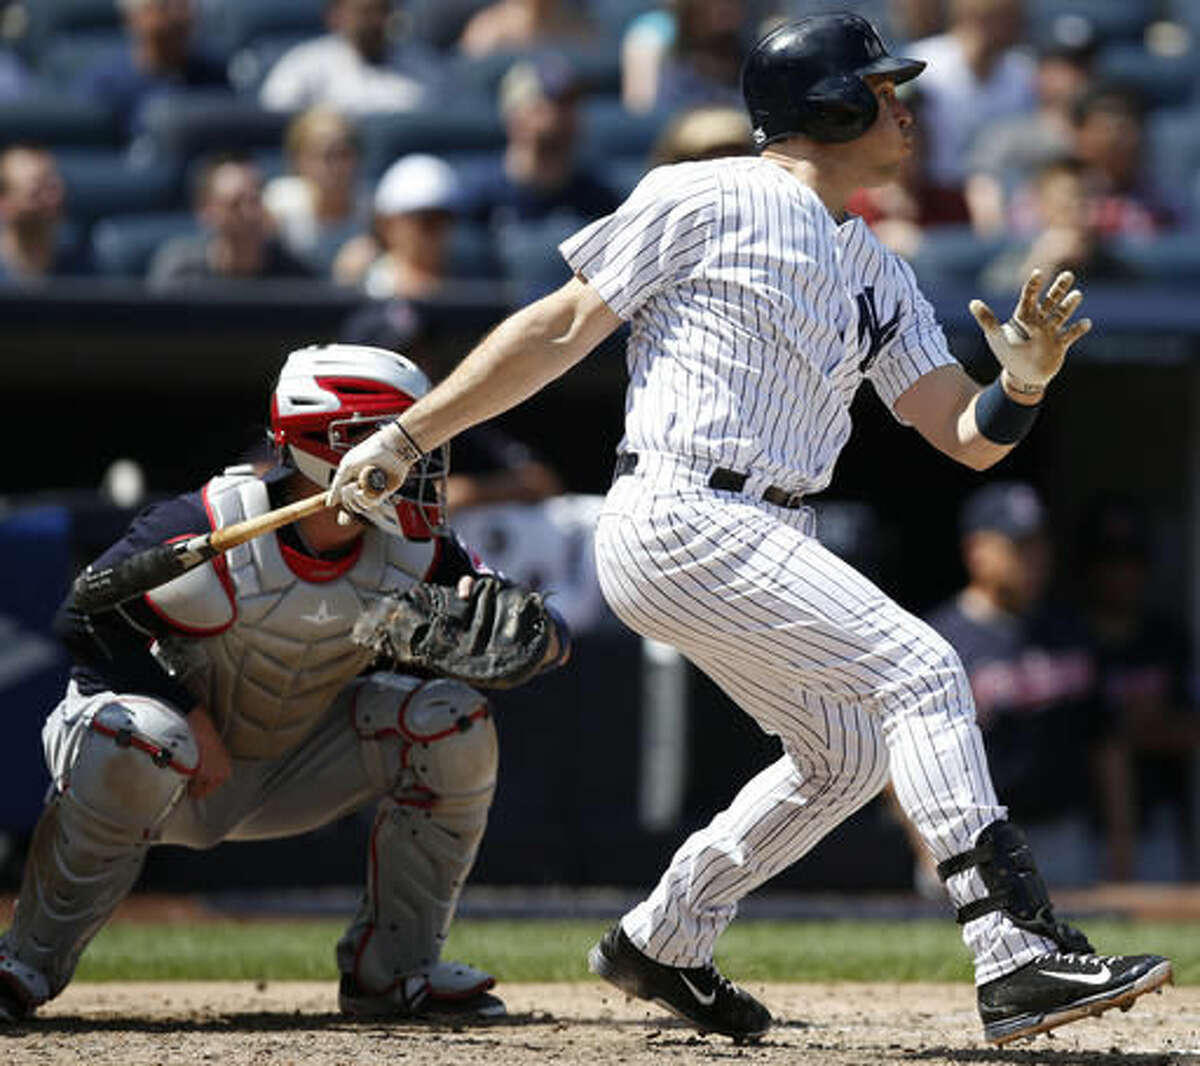 New York Yankees' Mark Teixeira, right, hits a fifth-inning double in a baseball game against the Cleveland Indians, in New York, Sunday, Aug. 7, 2016. Indians catcher Roberto Perez looks on. (AP Photo/Kathy Willens)